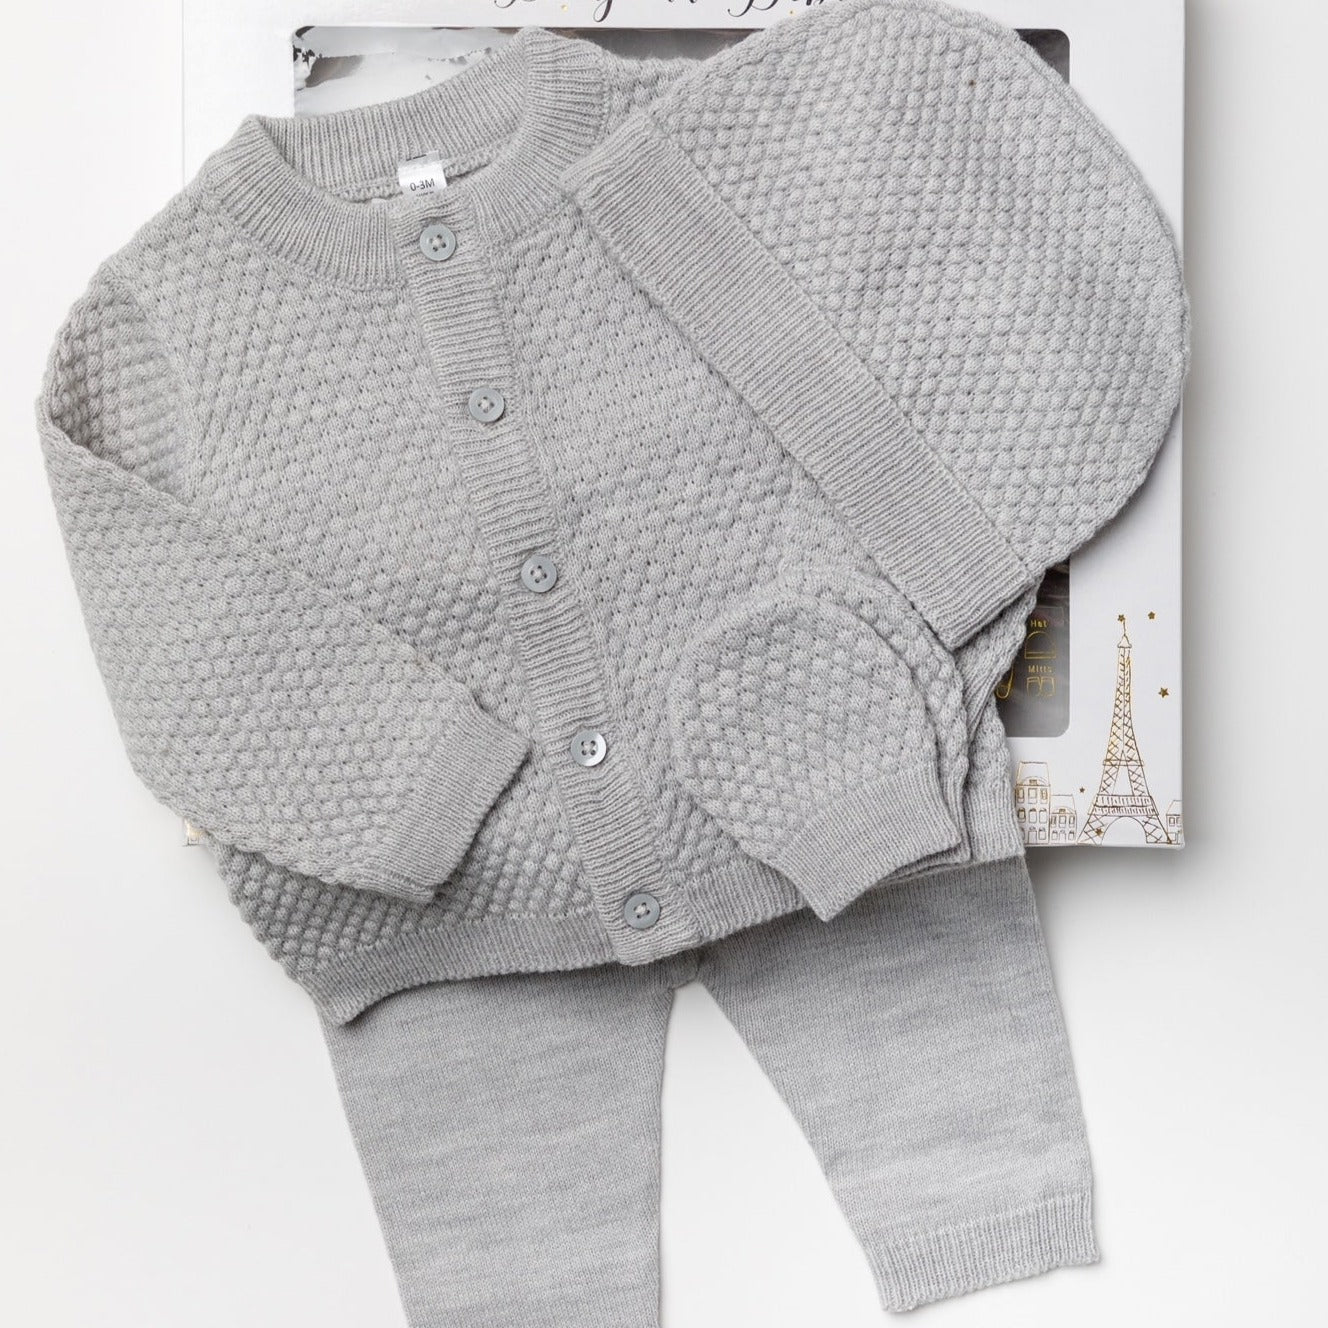 Grey Knitted 4 Piece Outfit In A Gift Box